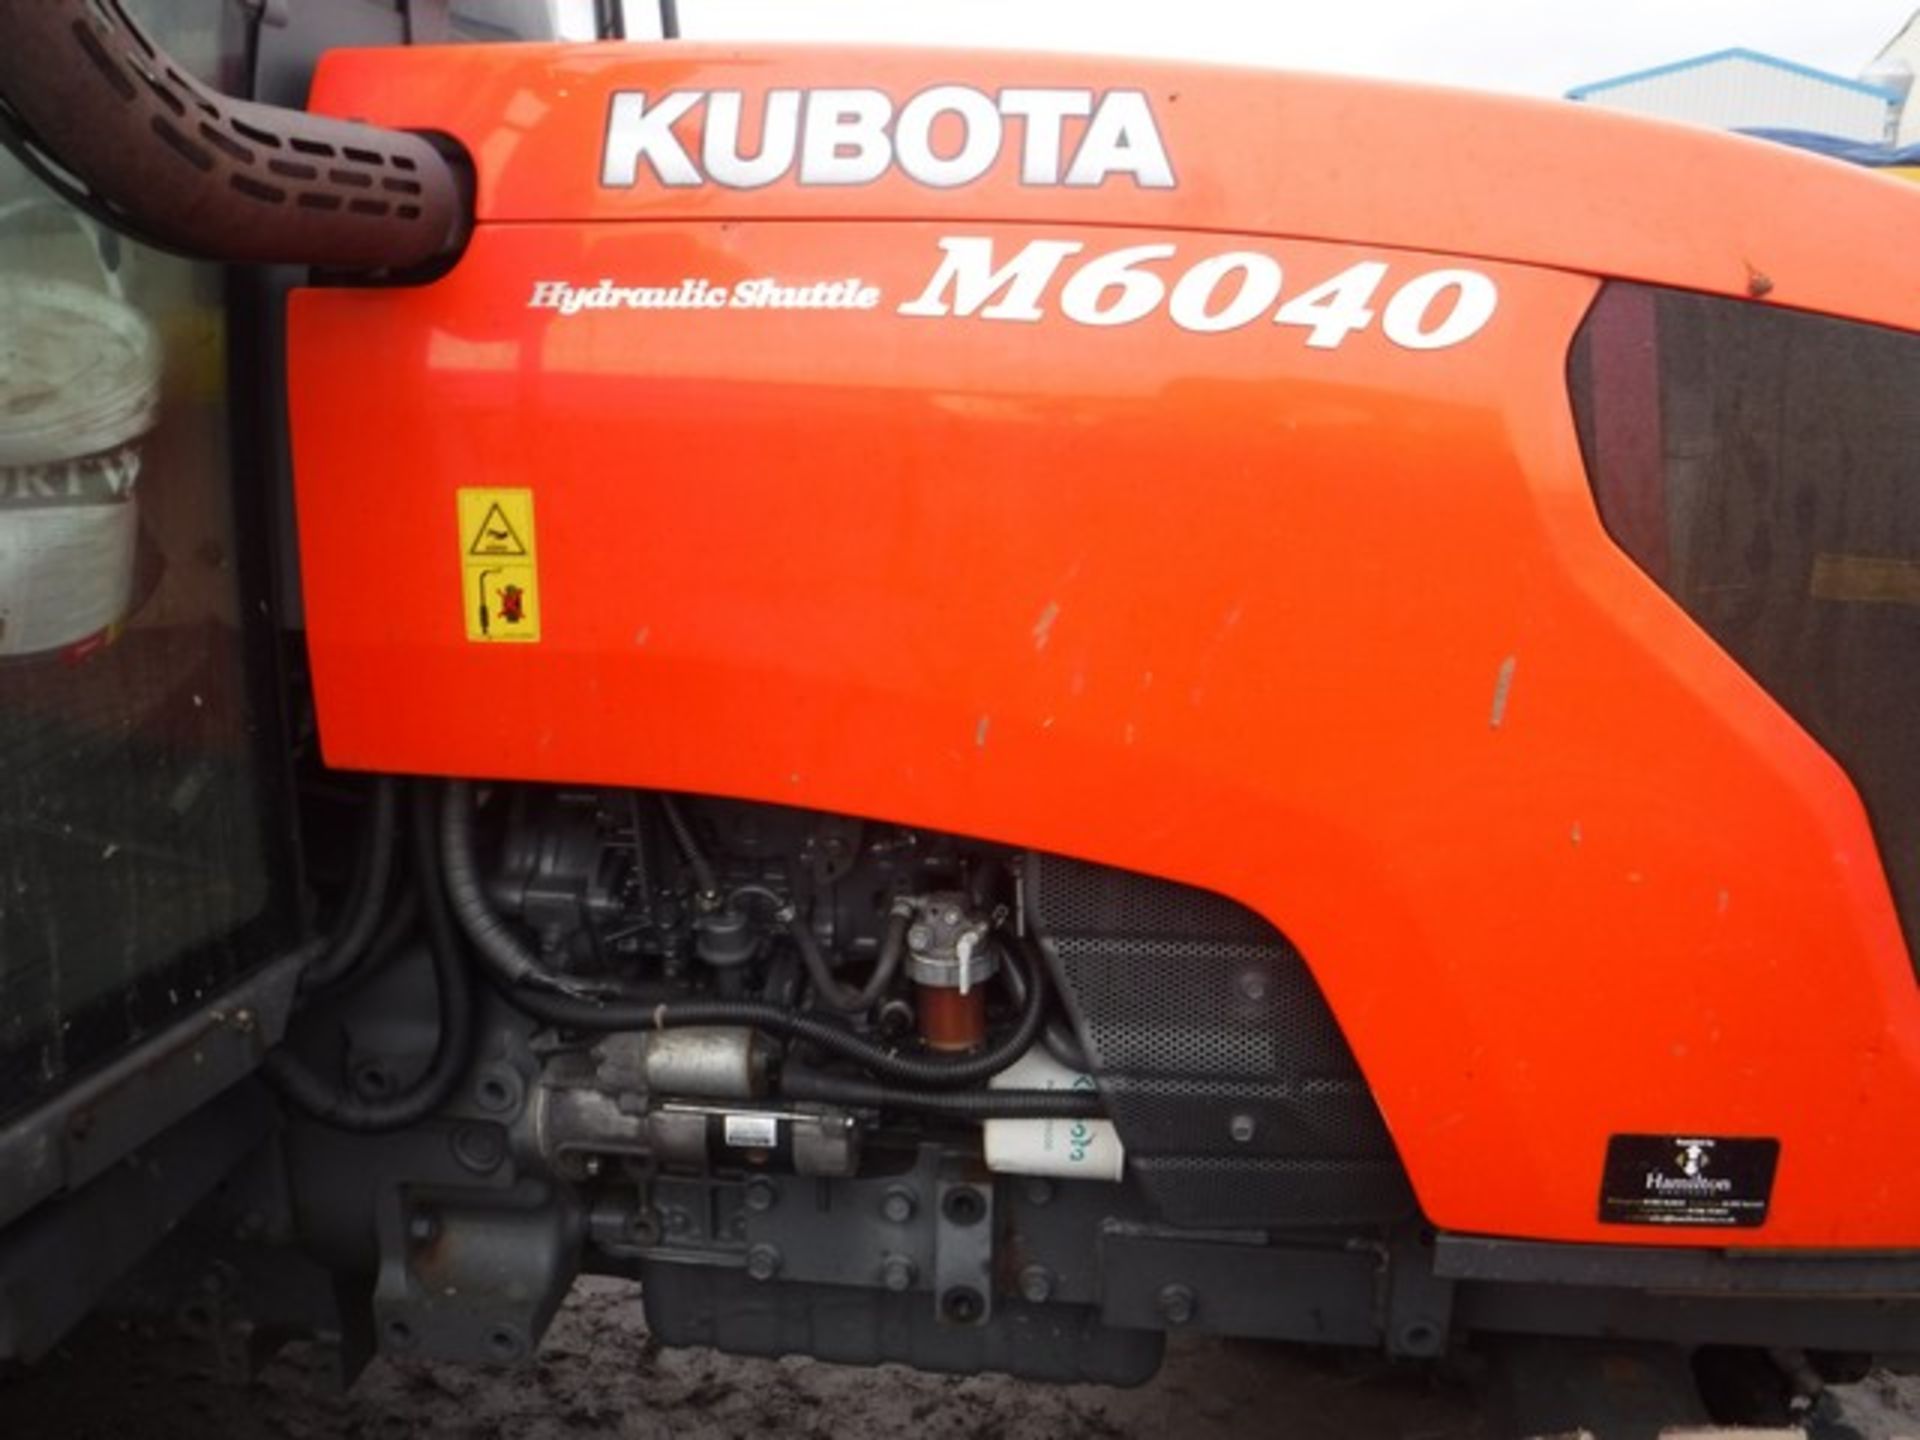 2013 KUBOTA M6040H-C AAGRIC TRACTOR REG - SF13EYJ - 6828HRS - Image 6 of 21